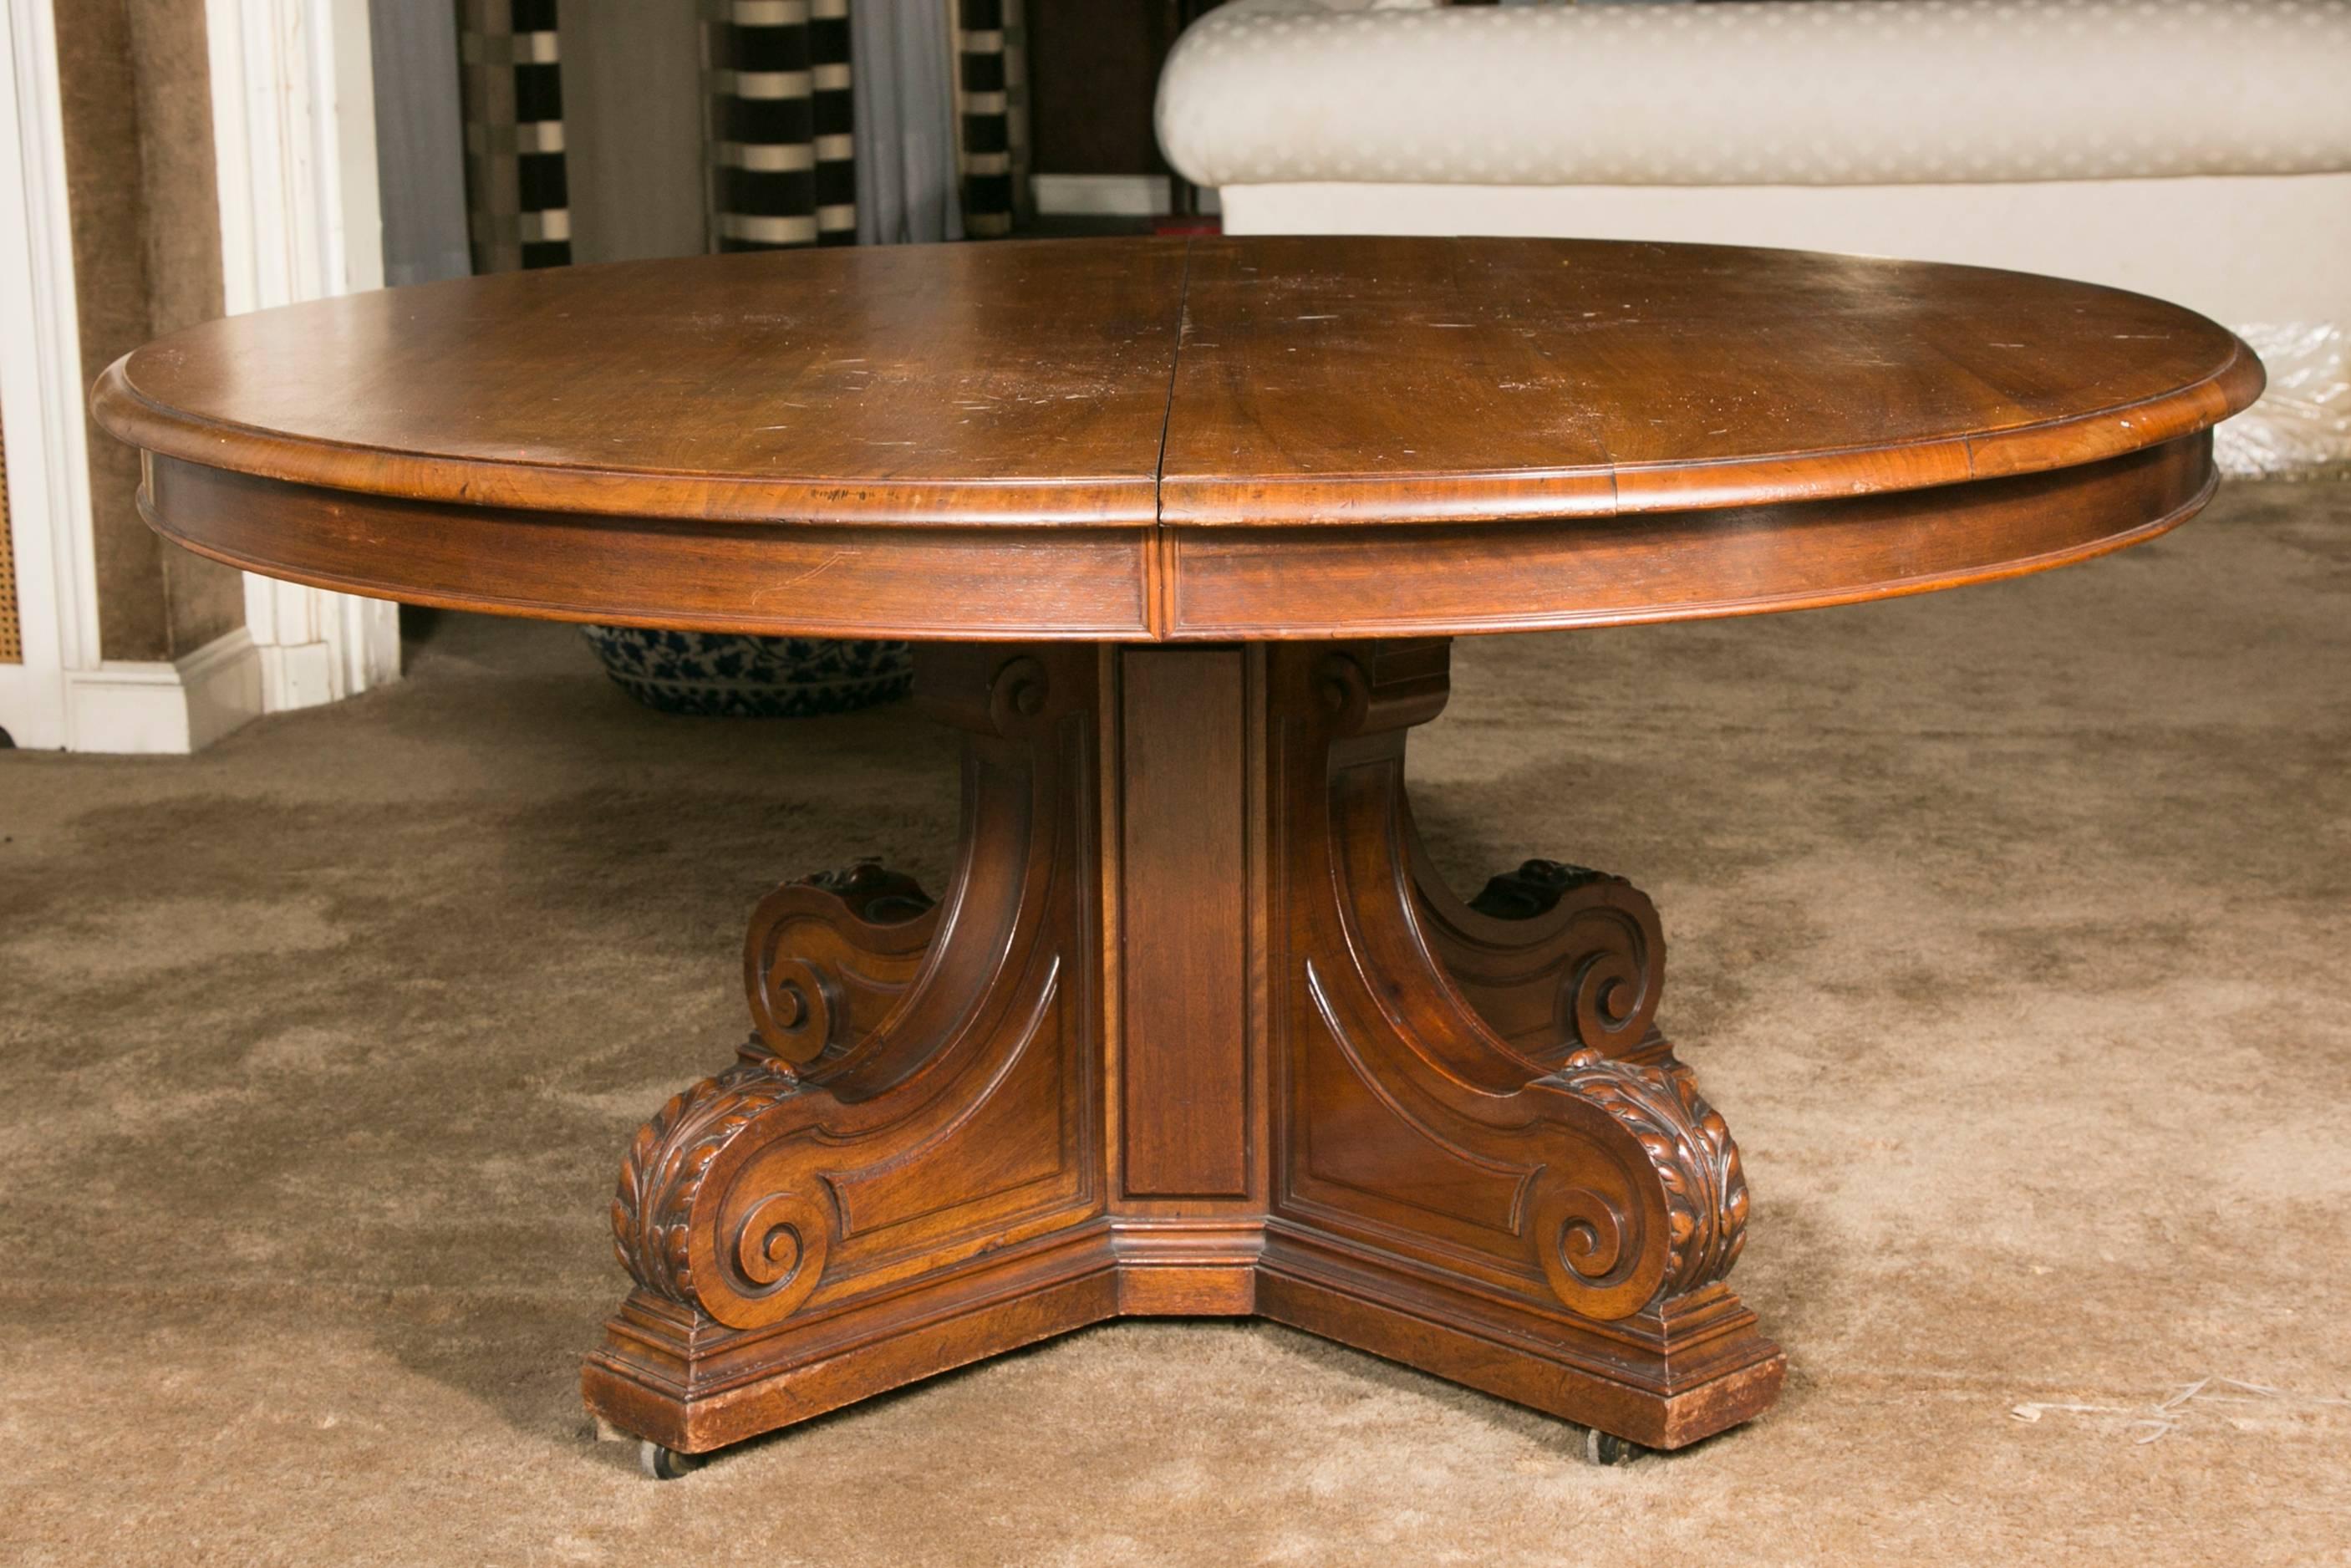 Large round extending dinning room solid walnut table on a center feet with acanthus leaves, possibility to extend it with four extensions that must be made by the customer,
when open, two fluted extra legs come down to give stability to the table.